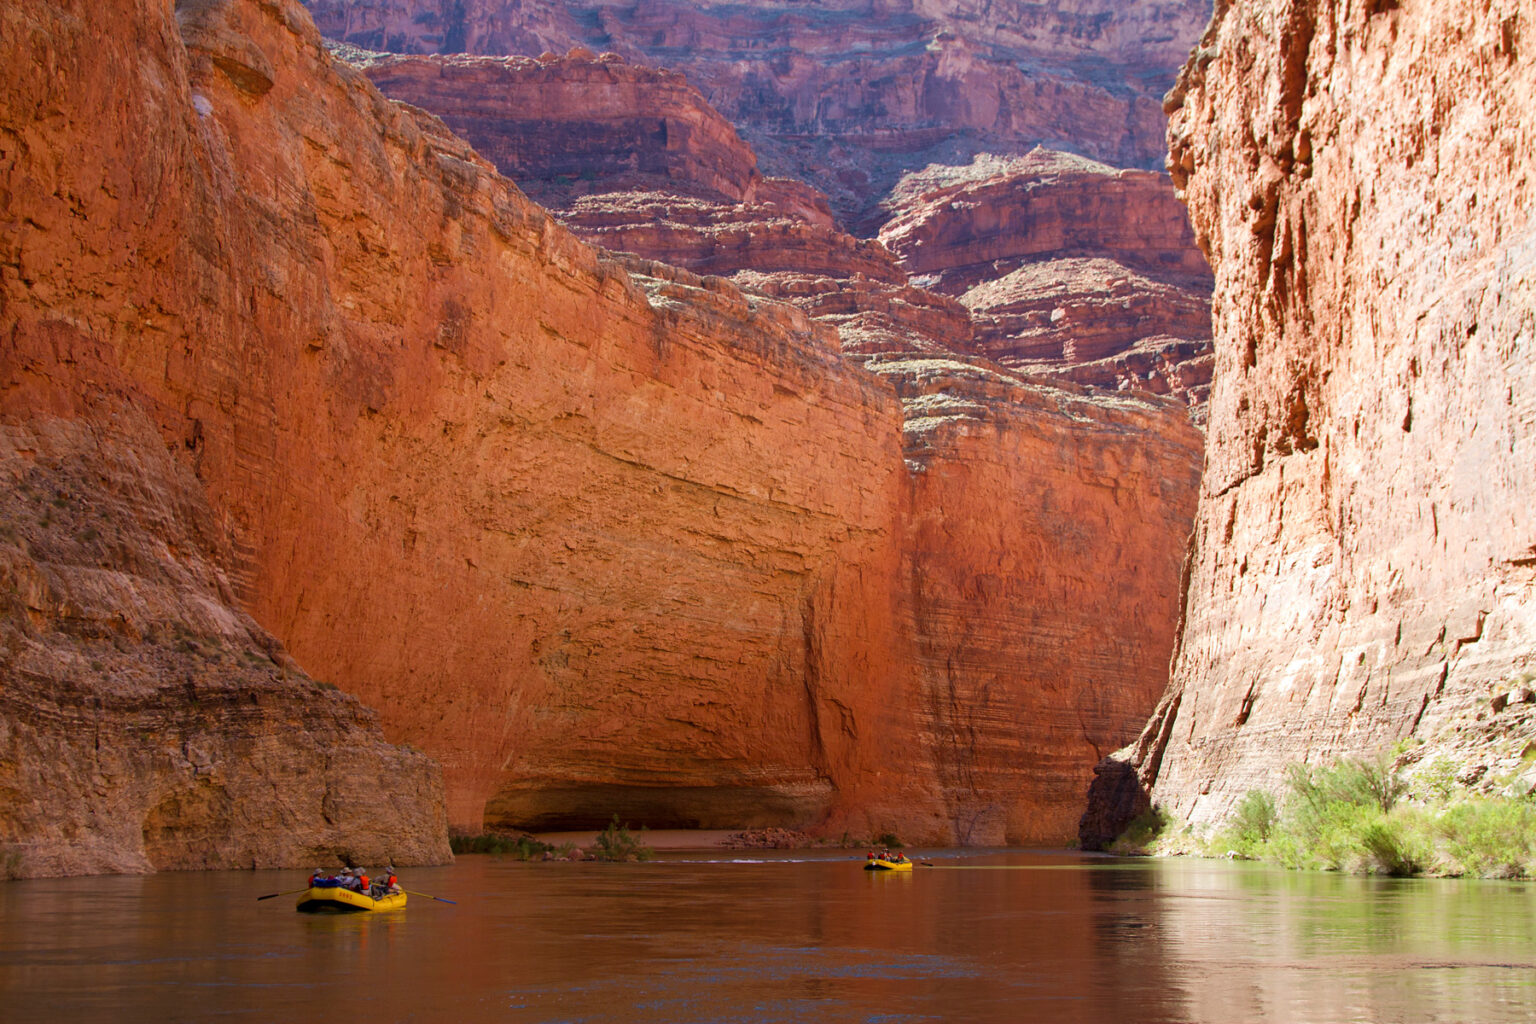 Approaching Redwall Cavern in Grand Canyon